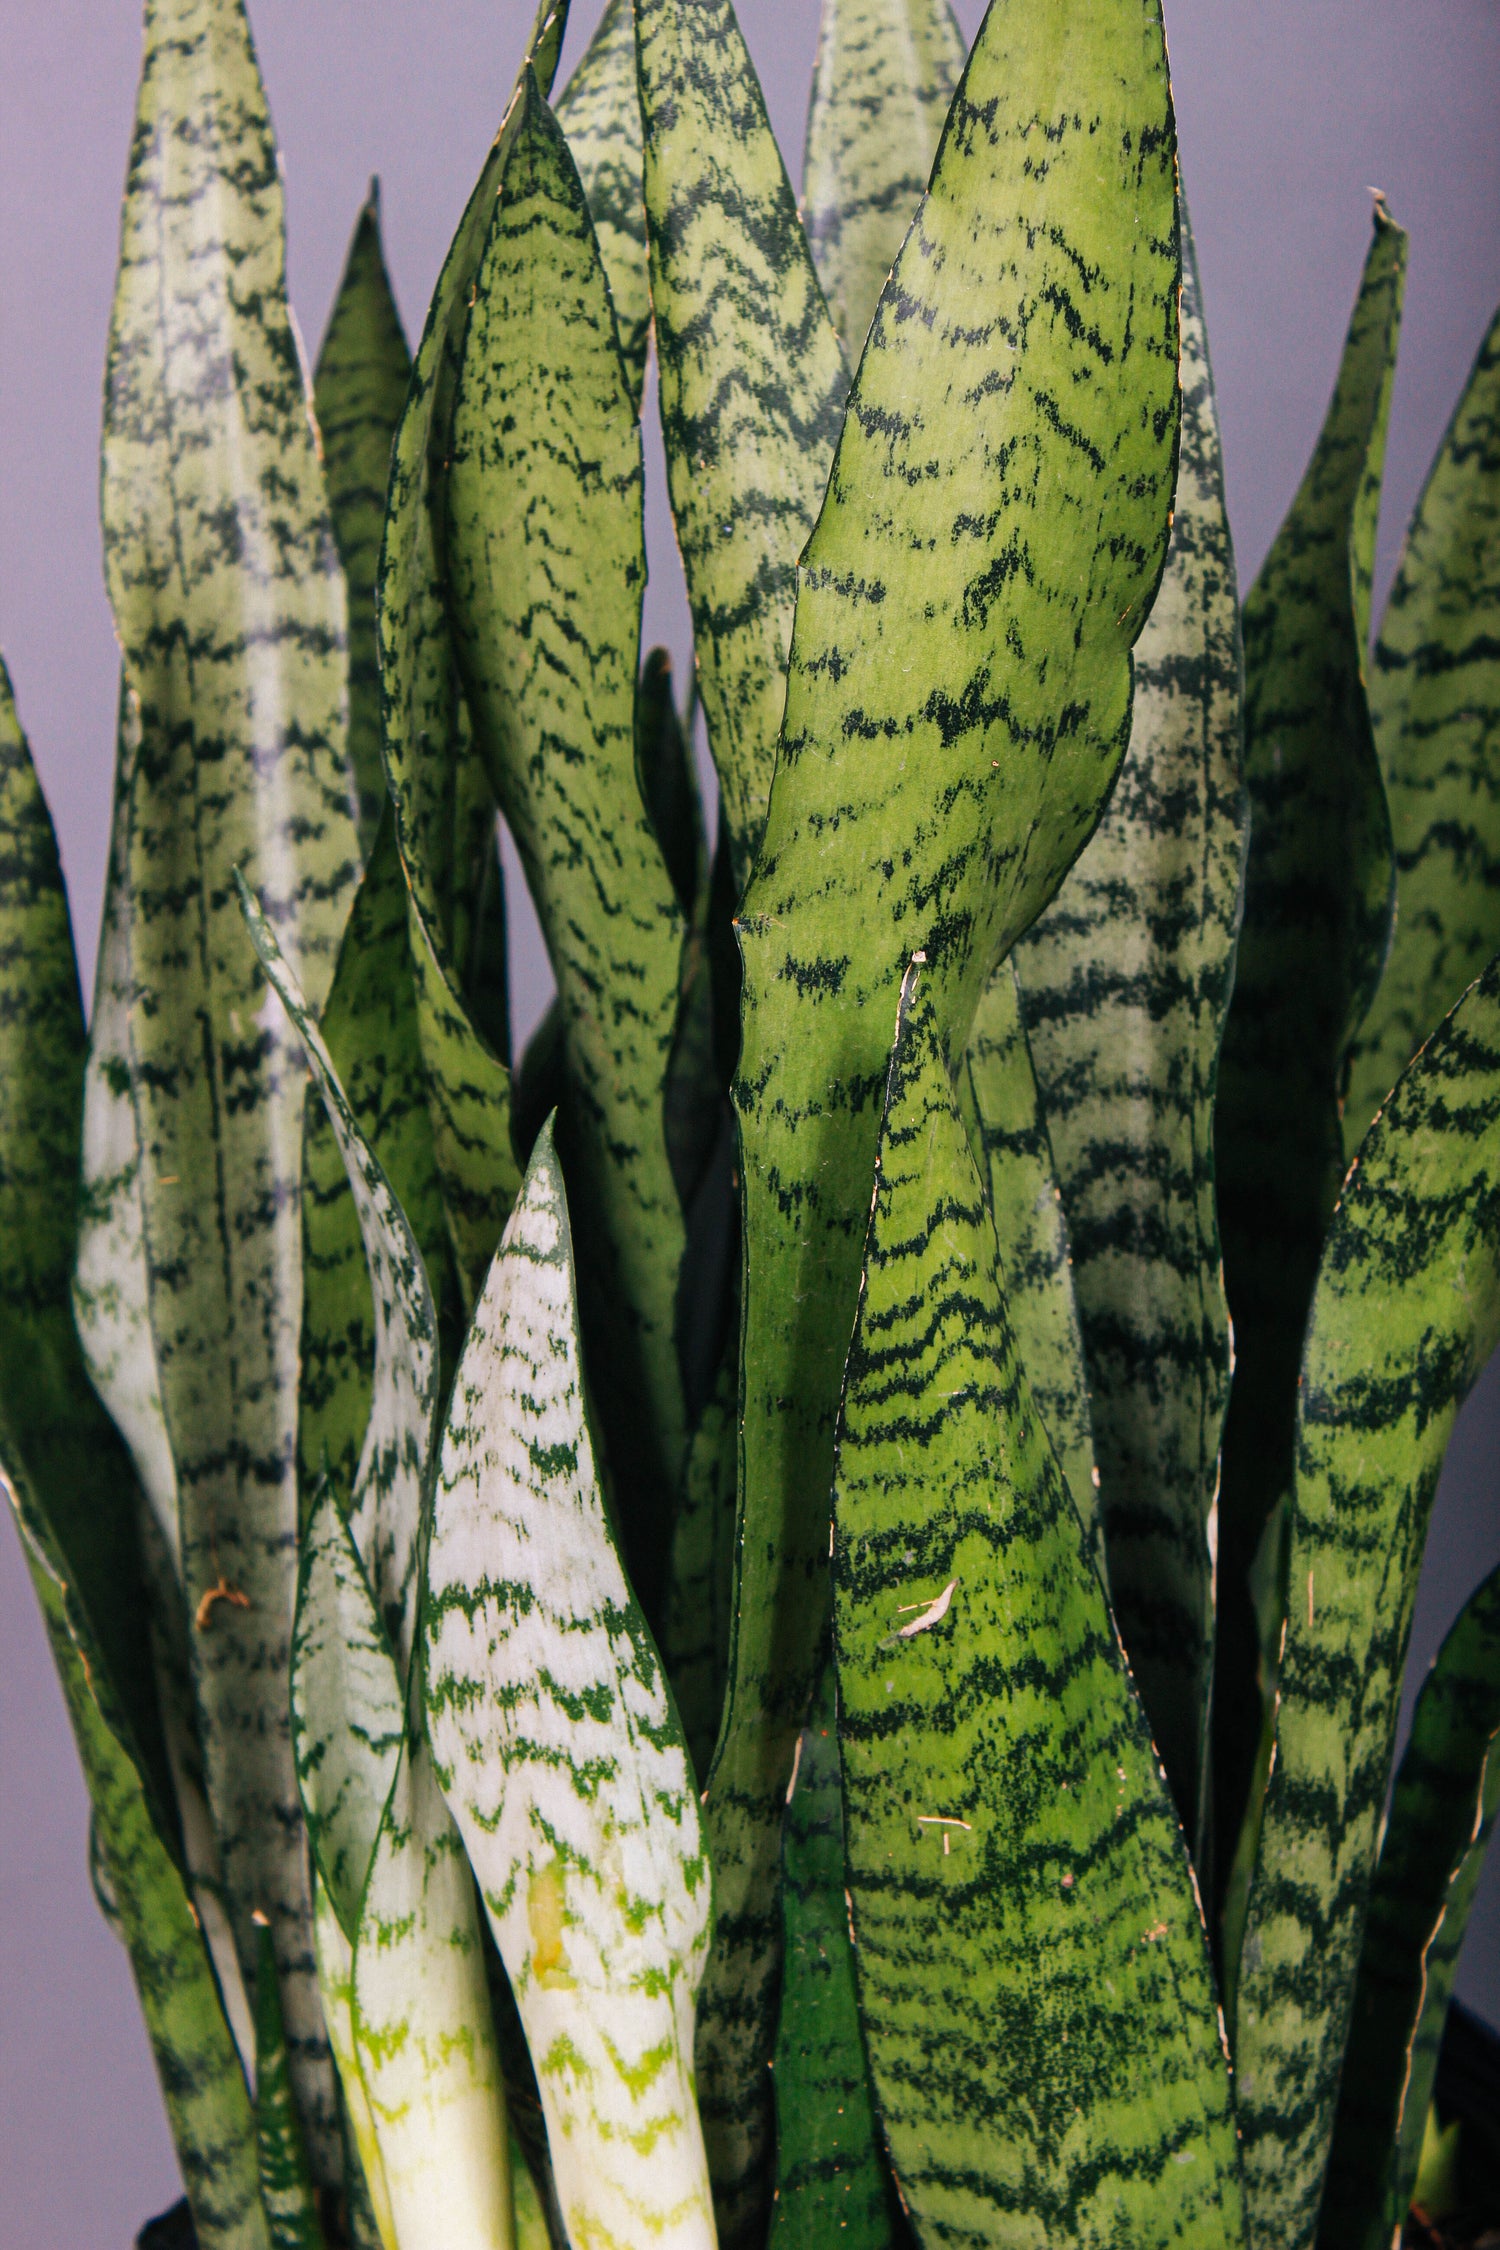 A close-up of the stripes on the Sansevieria Zeylanica leaves.